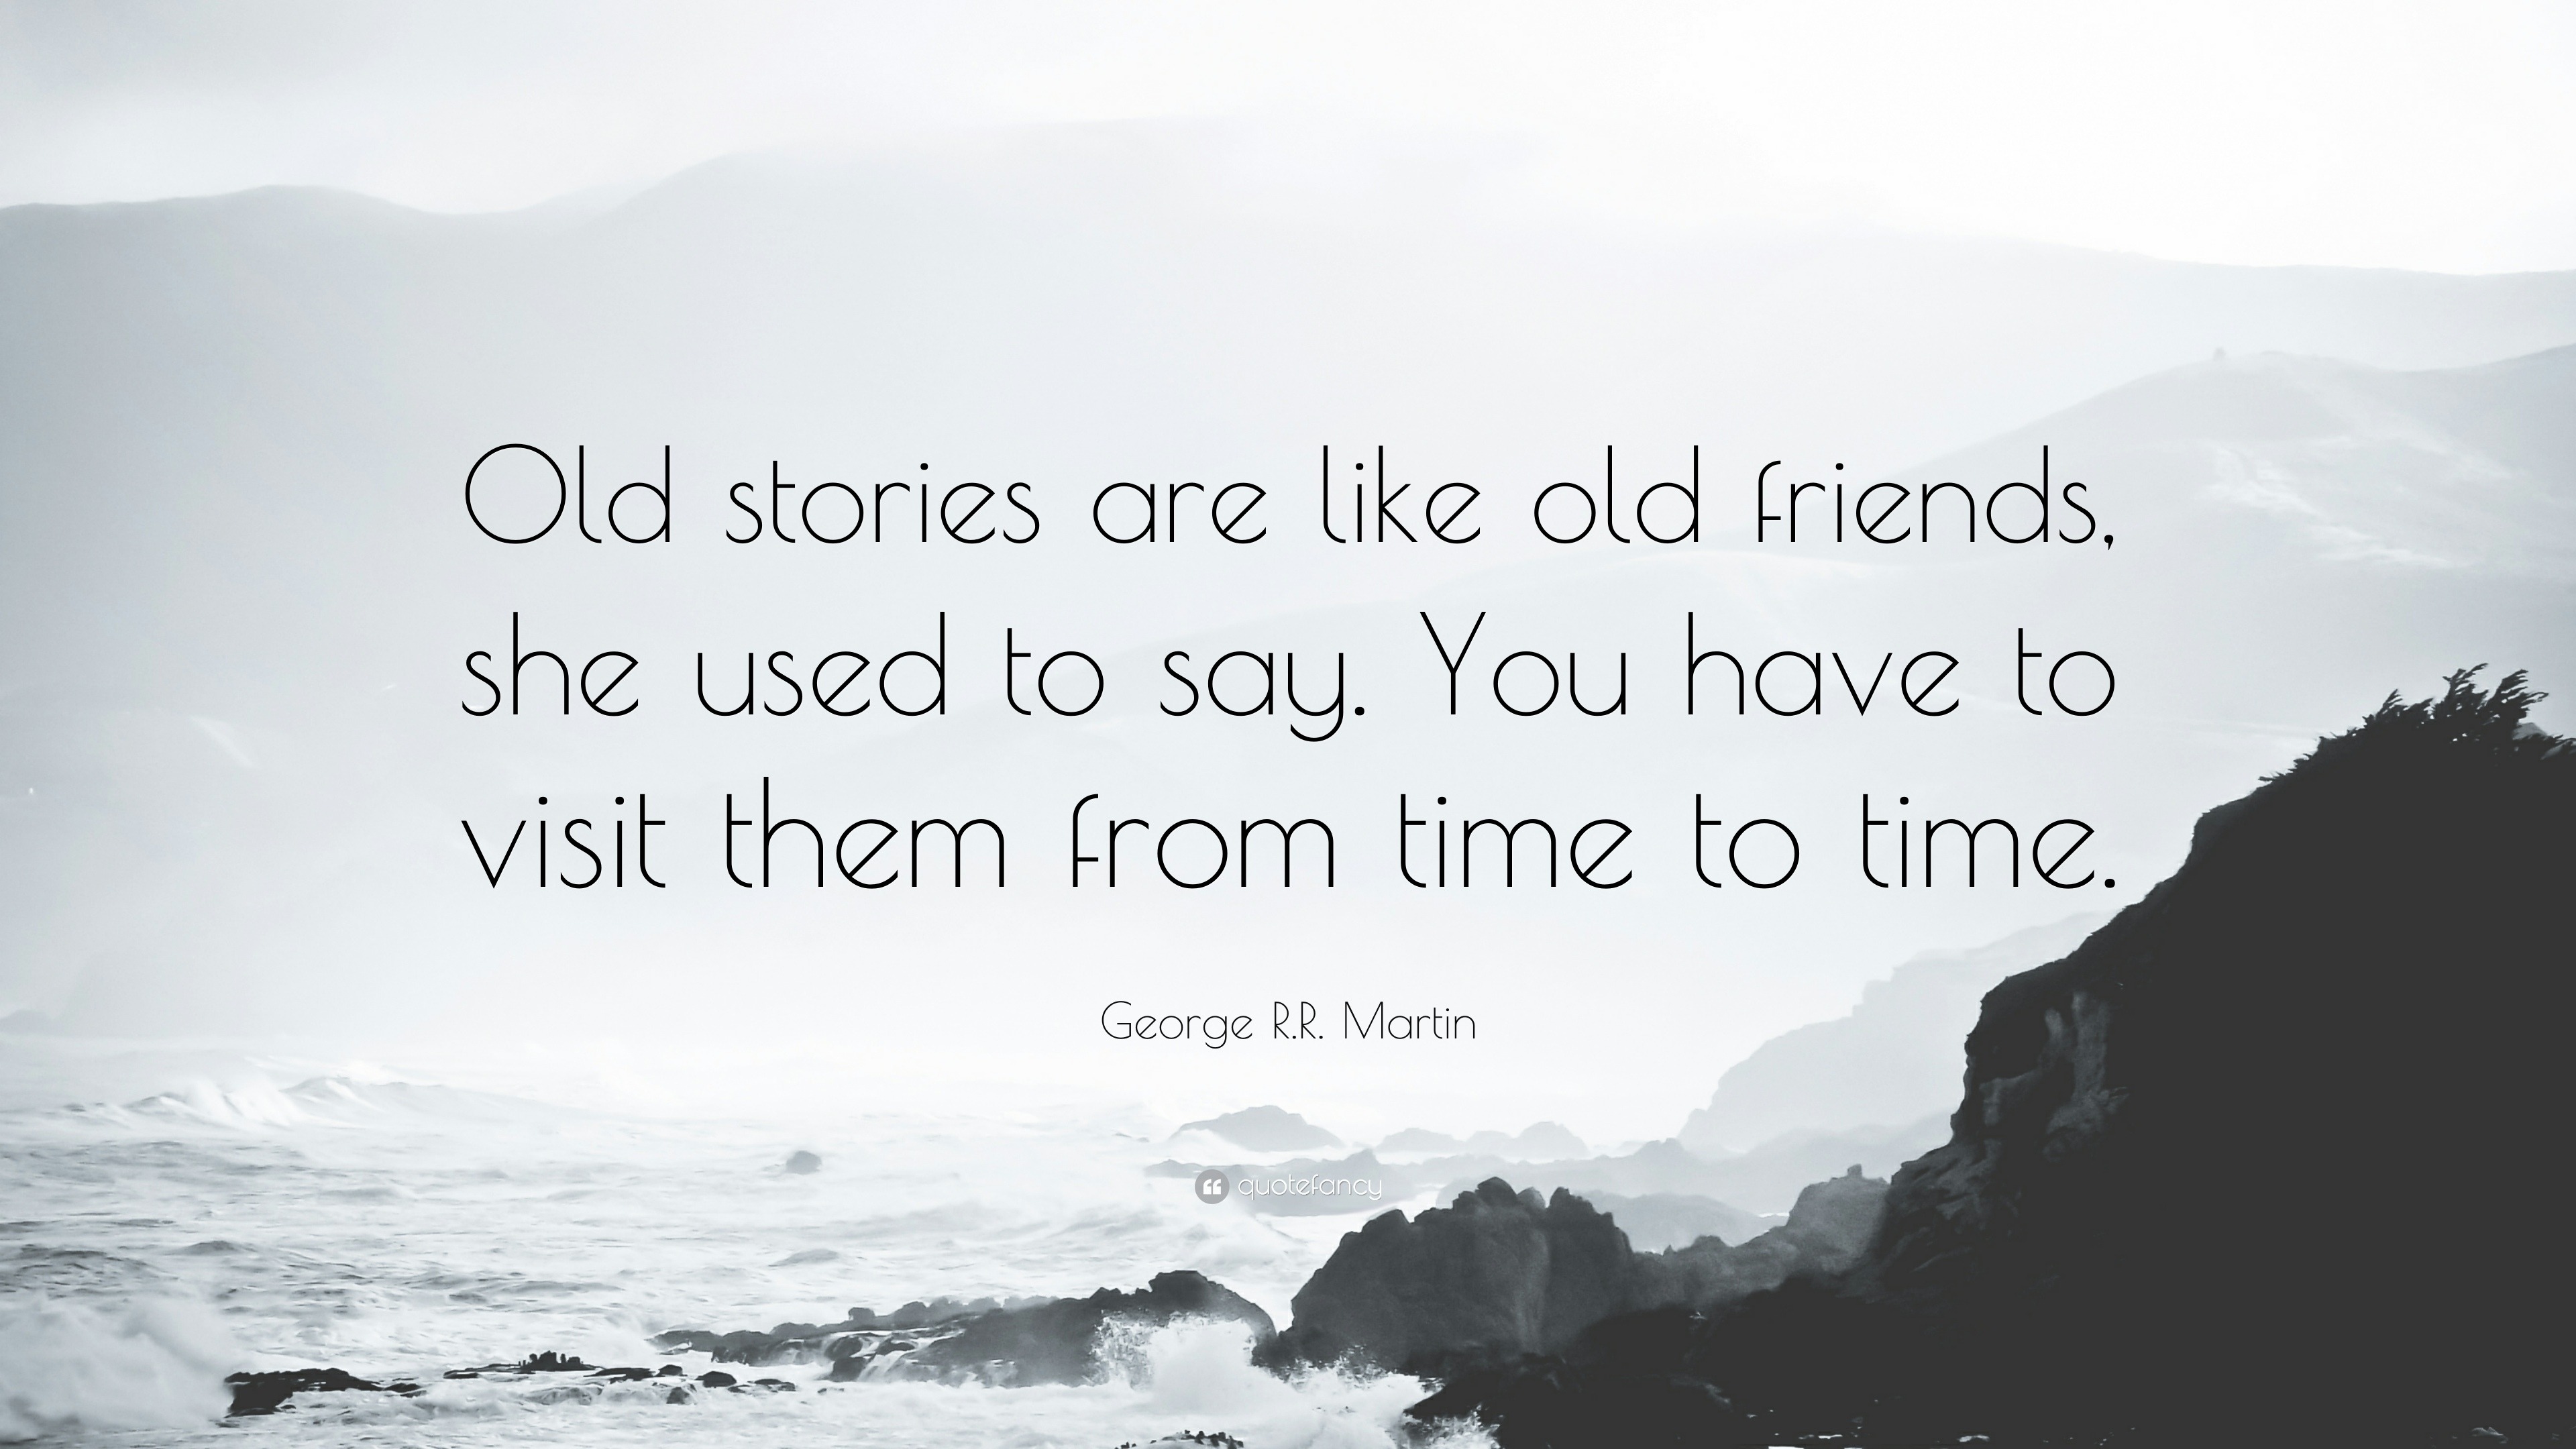 George R R Martin Quote Old Stories Are Like Old Friends She Used To Say You Have To Visit Them From Time To Time 12 Wallpapers Quotefancy